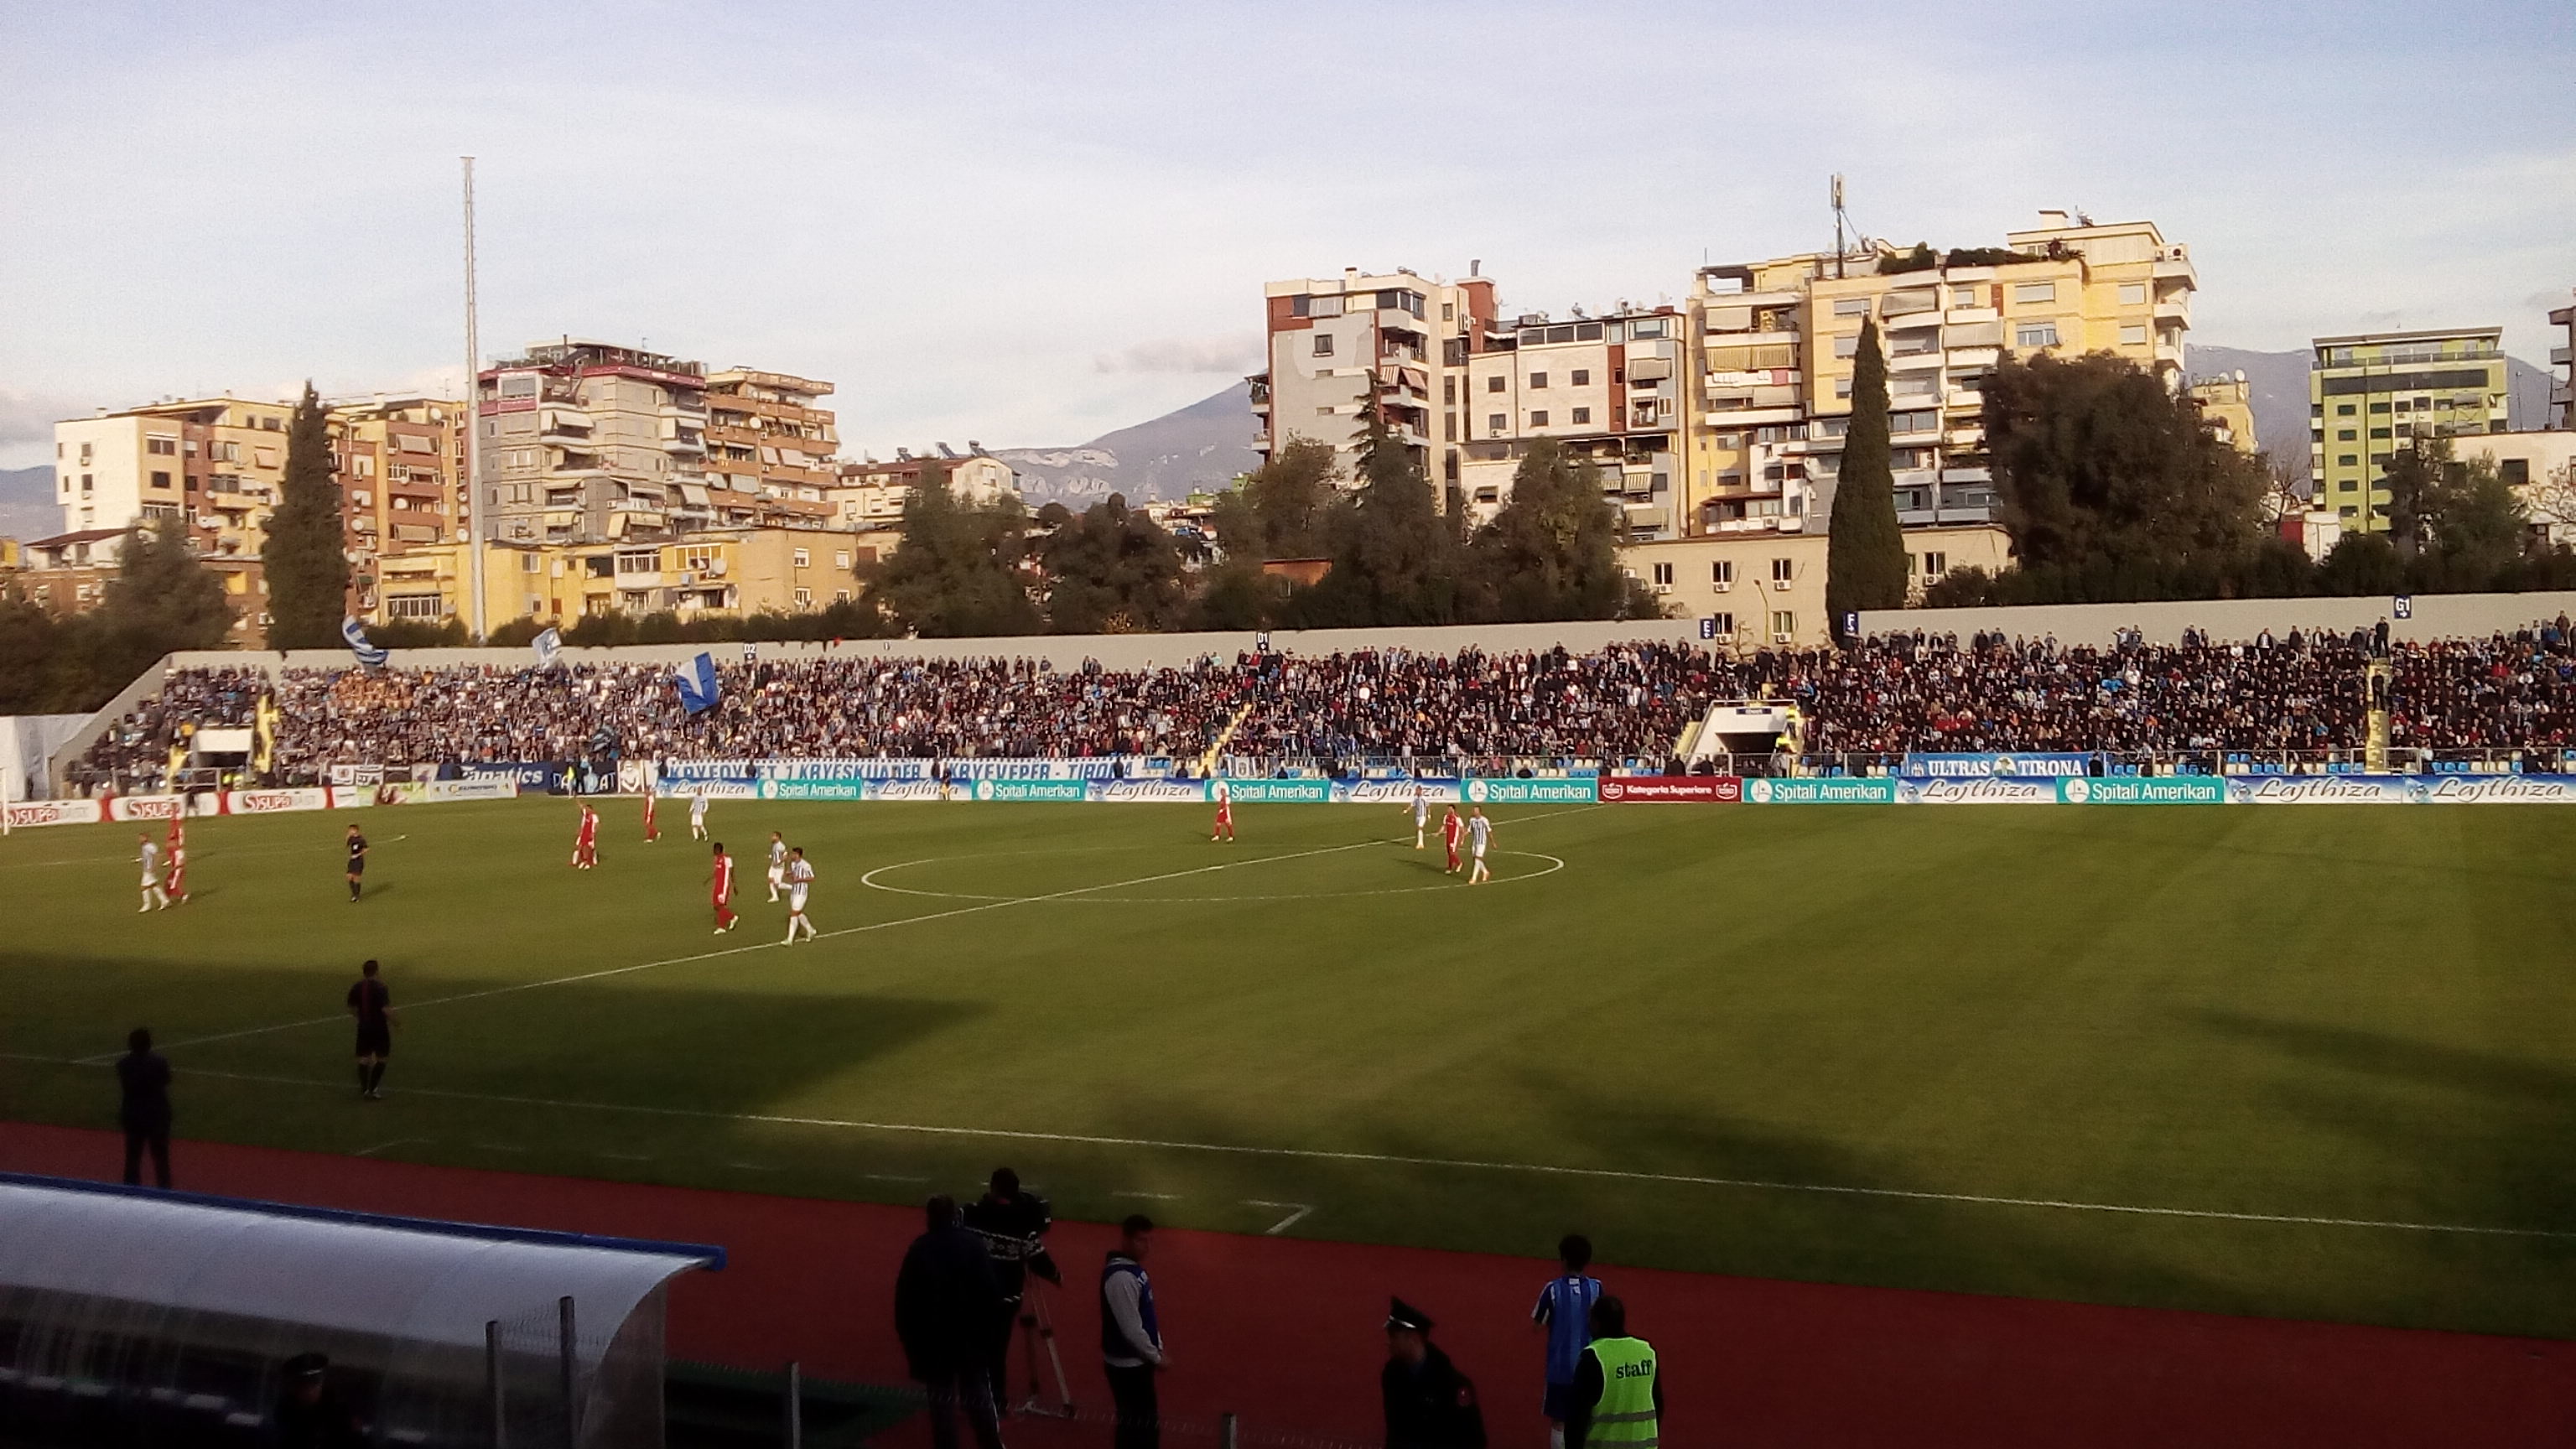 A view of the Selman Stermasi stadium, headquarters of the KF